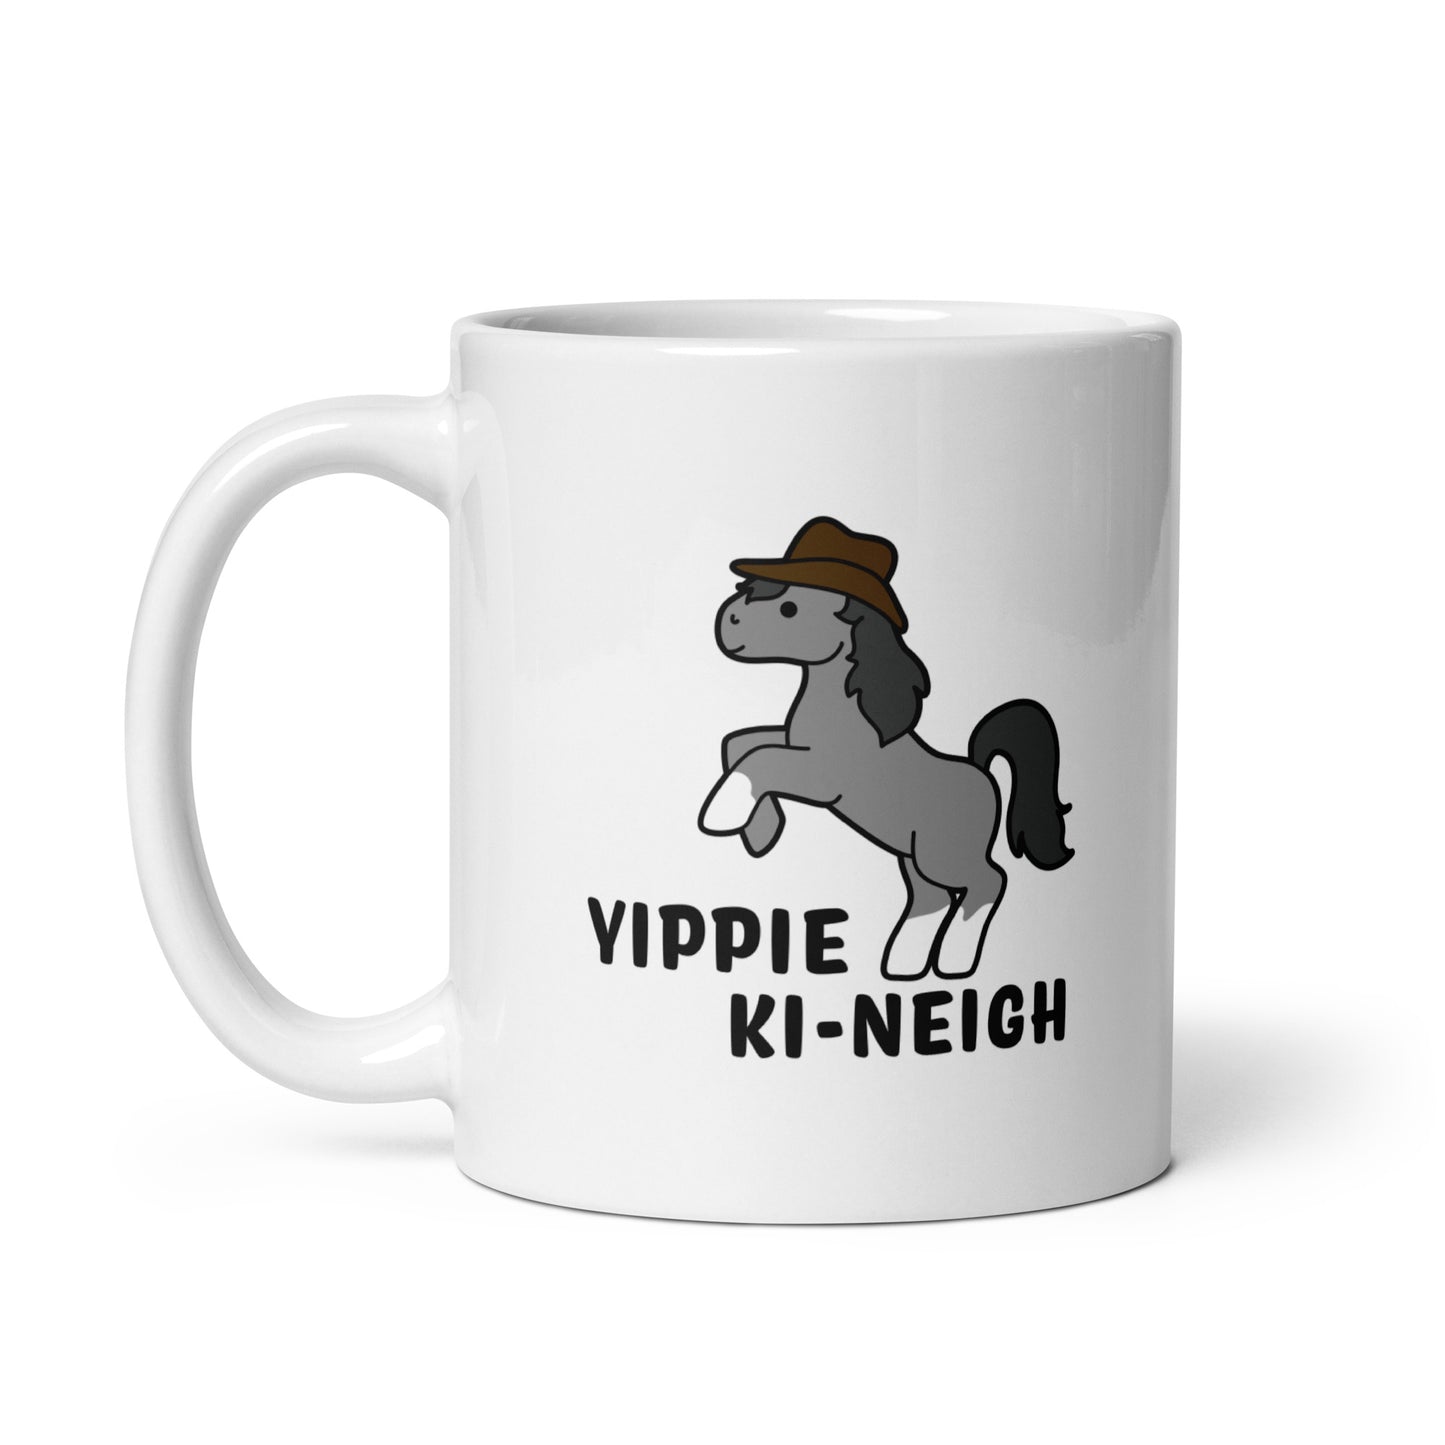 A white 11 ounce ceramic coffee mug featuring an illustration of a smiling grey pony rearing and wearing a cowboy hat. Text underneath the pony reads "Yippie Ki-Neigh"